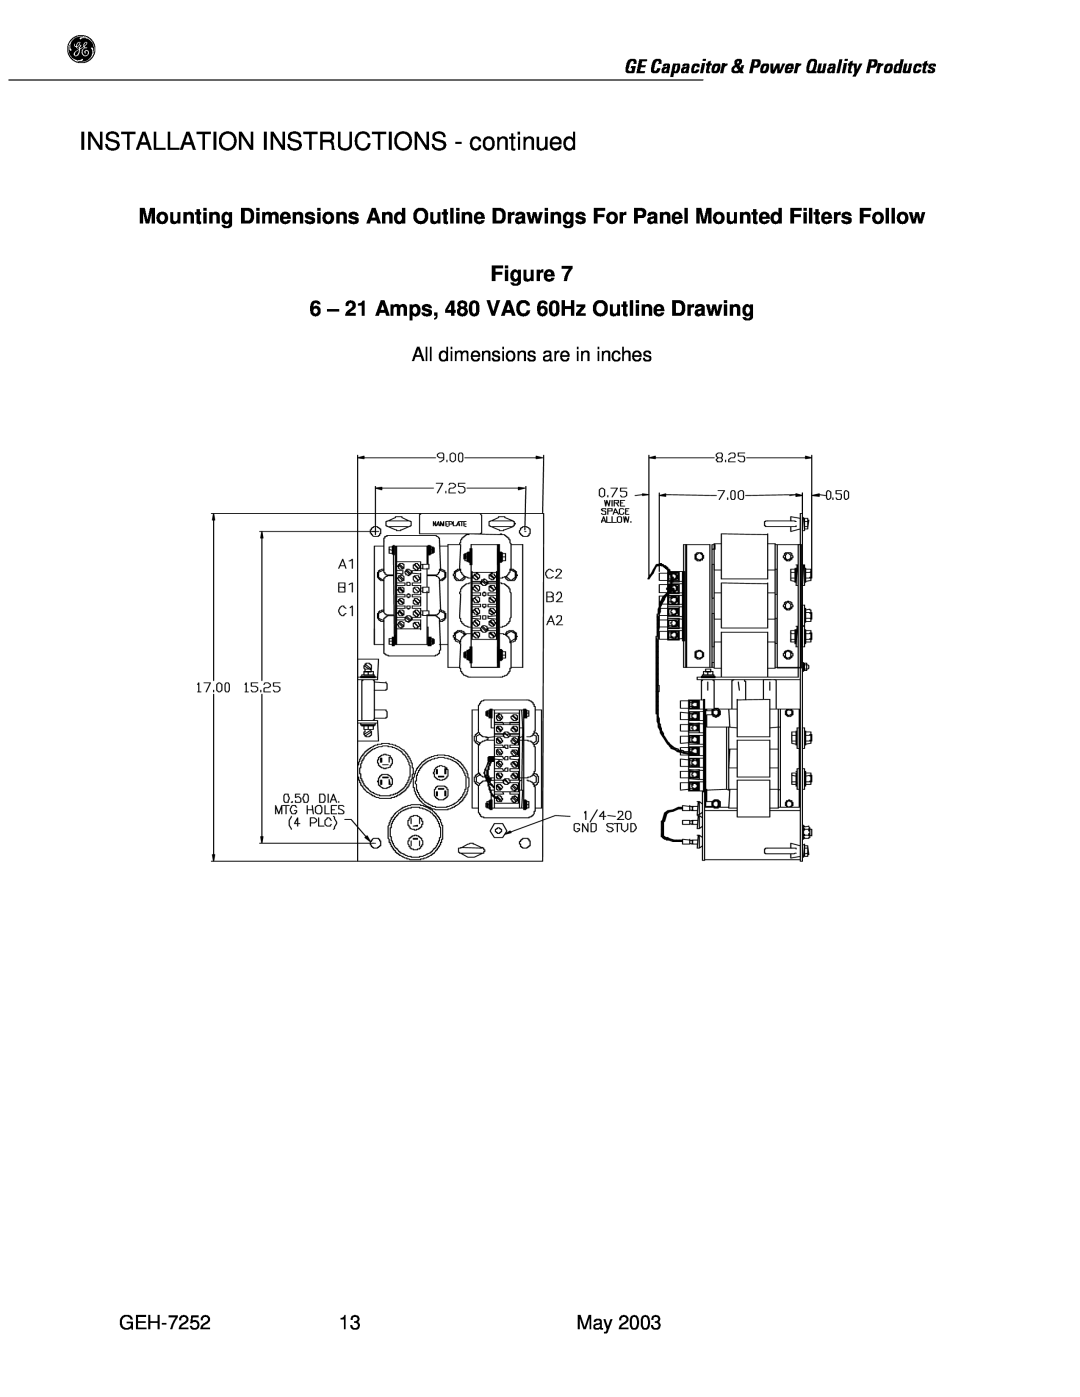 GE SERIES B 480 user manual INSTALLATION INSTRUCTIONS - continued, 21 Amps, 480 VAC 60Hz Outline Drawing 